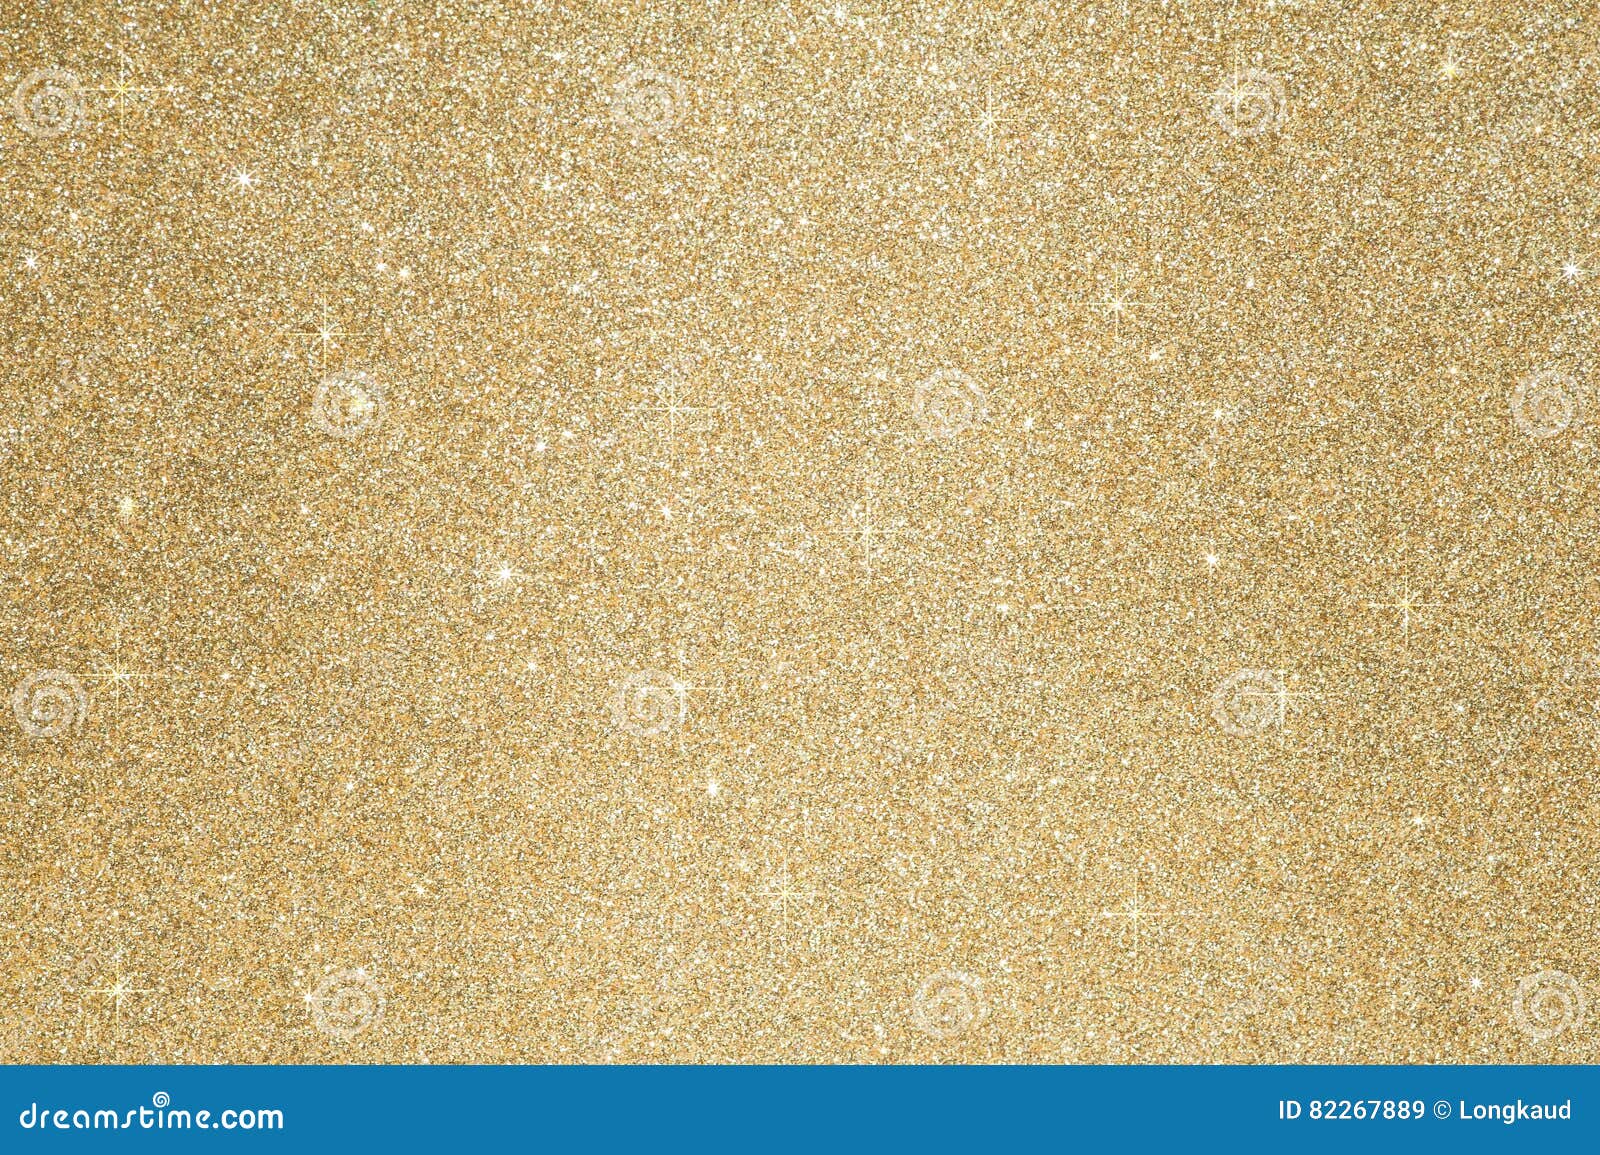 glitter sparkle gold background defocused abstract gold lights on background